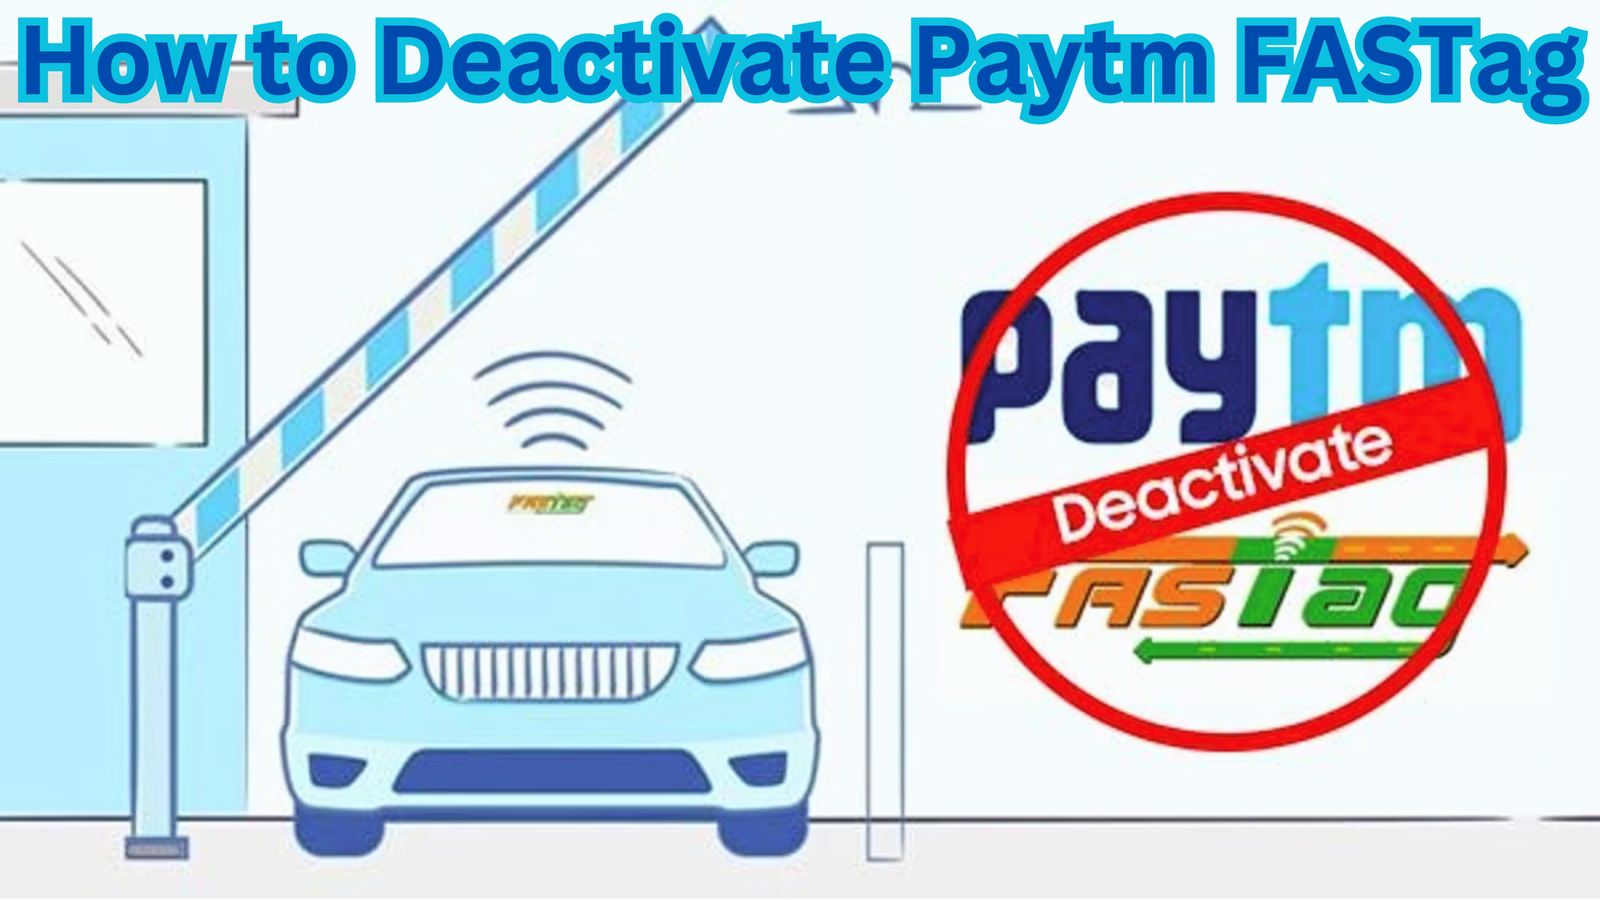 How to Deactivate or Close Paytm FASTag in 9 Steps